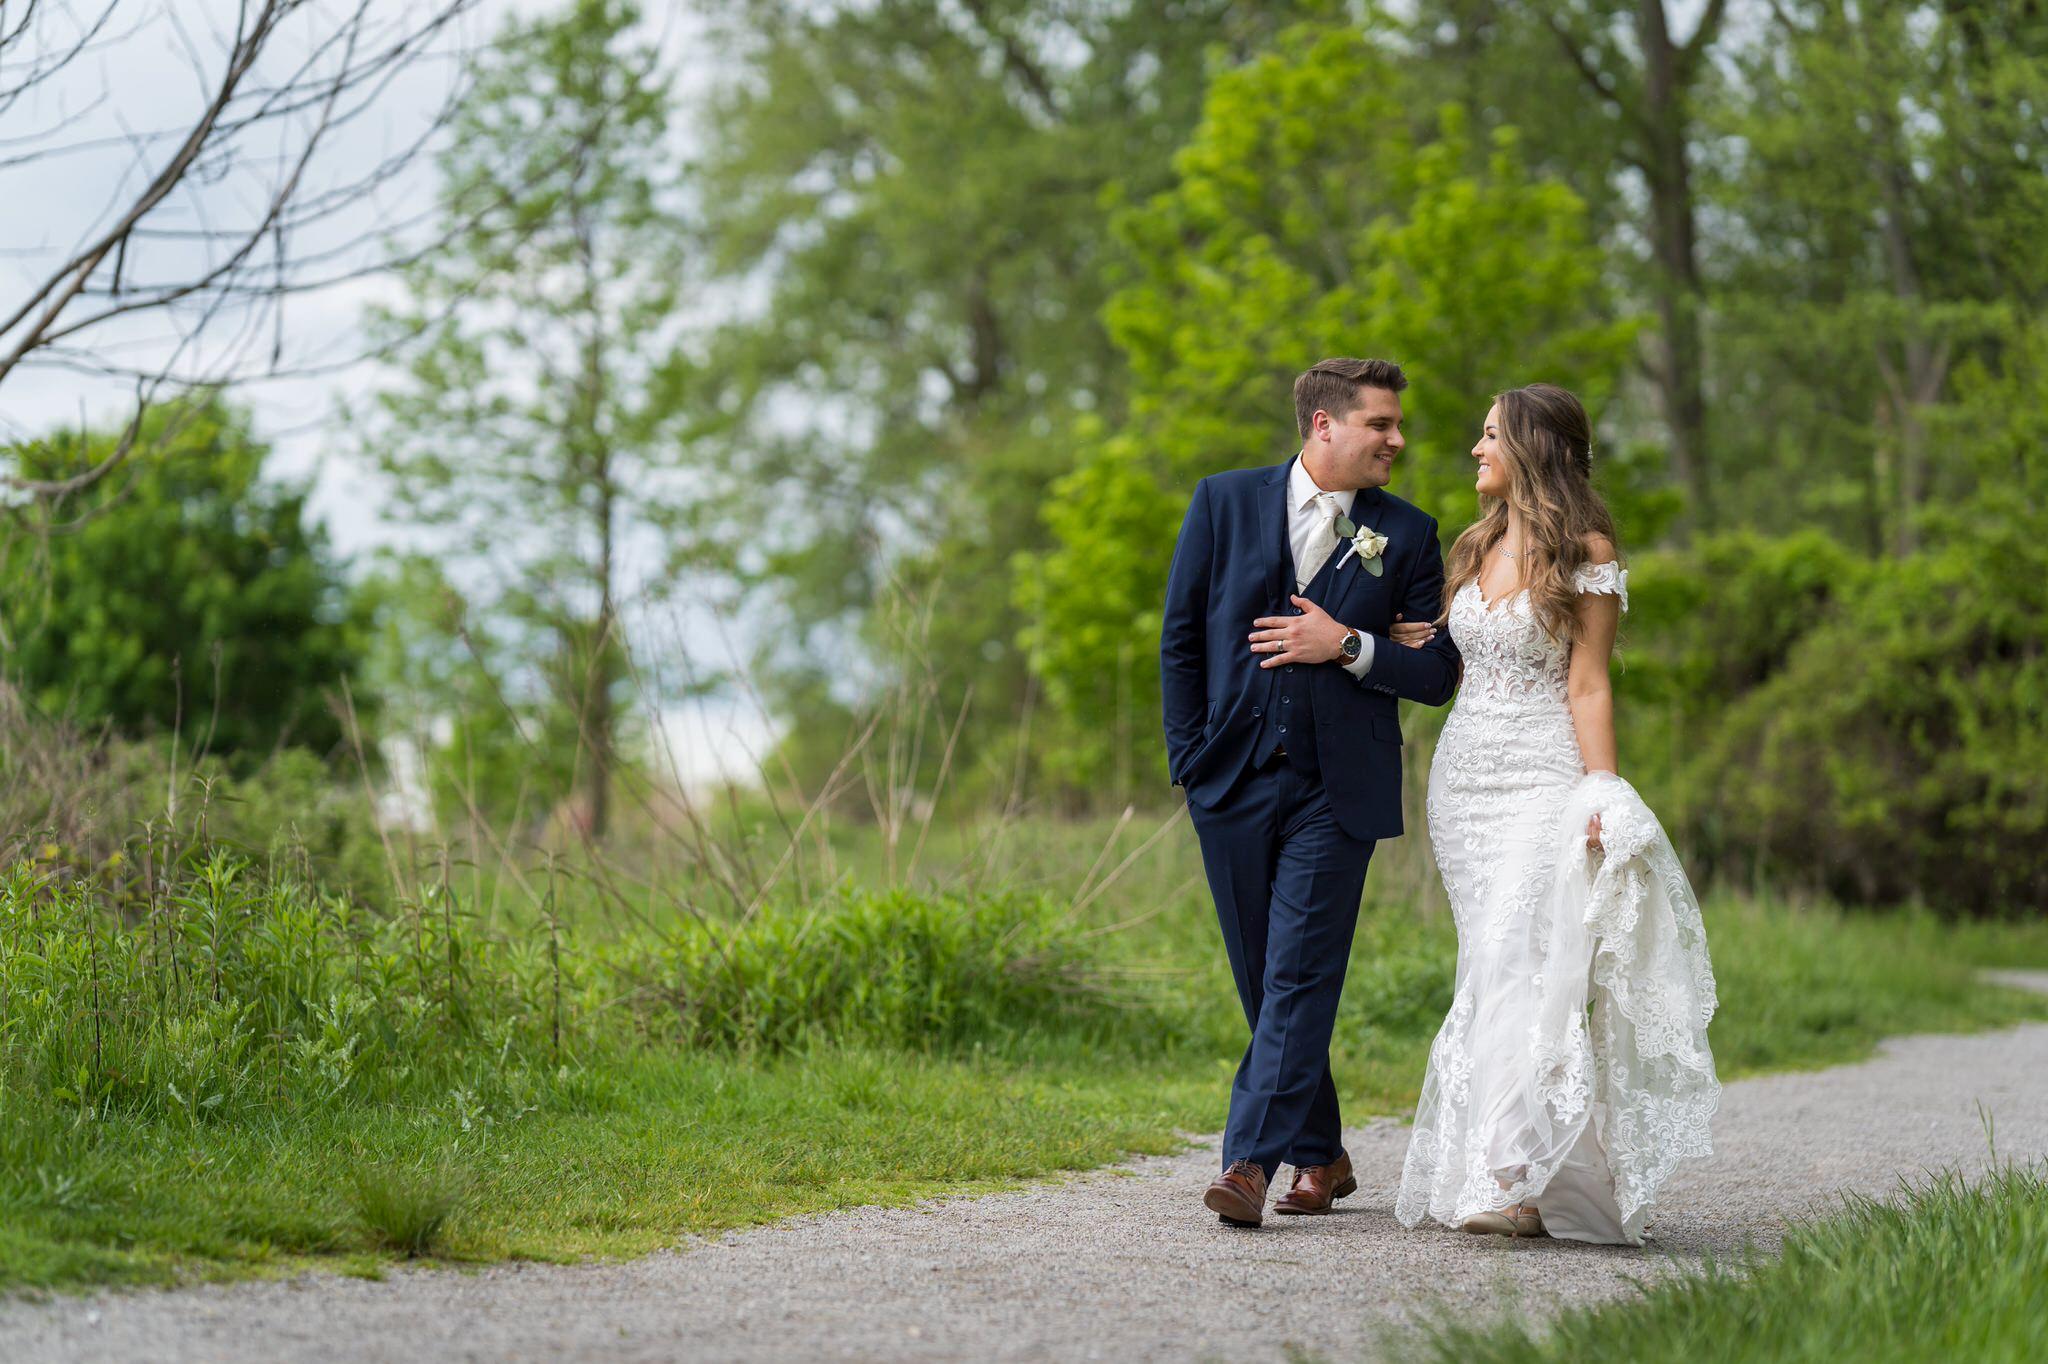 bride and groom walking on dirt path with greenery around them